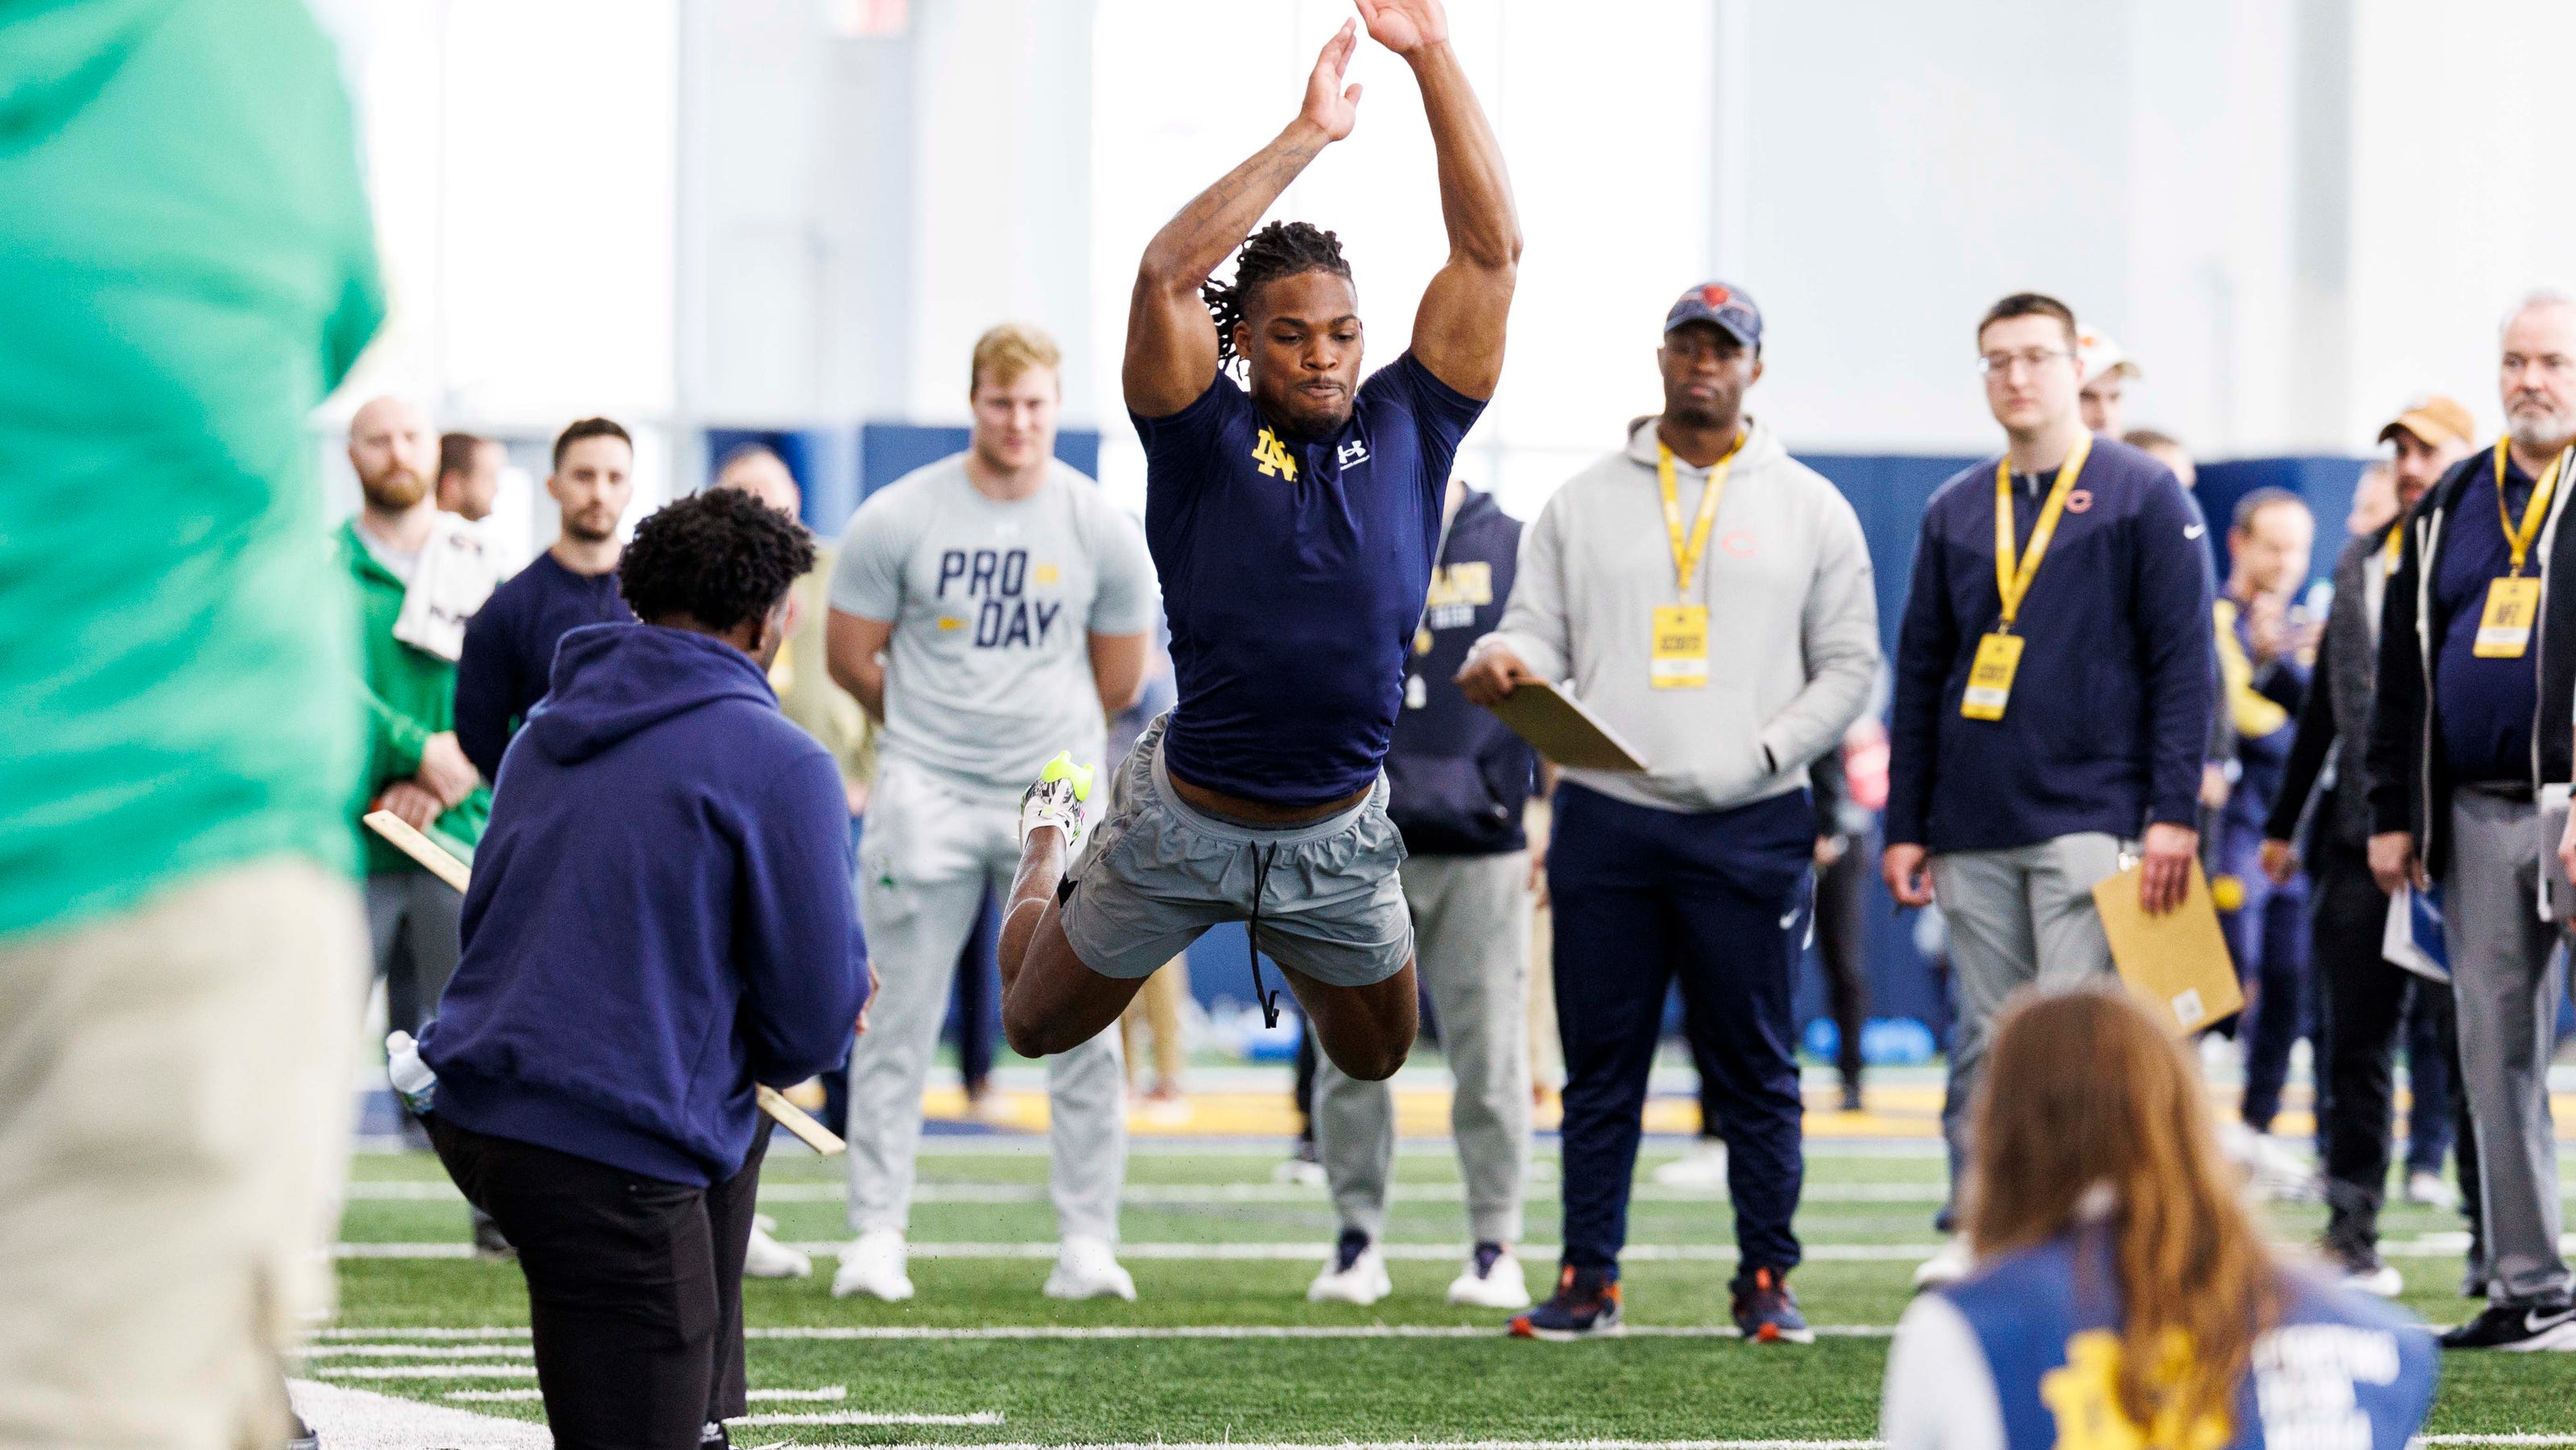   
																Photo gallery: Defensive back Thomas Harper out of Notre Dame is an NFL Draft prospect 
															 